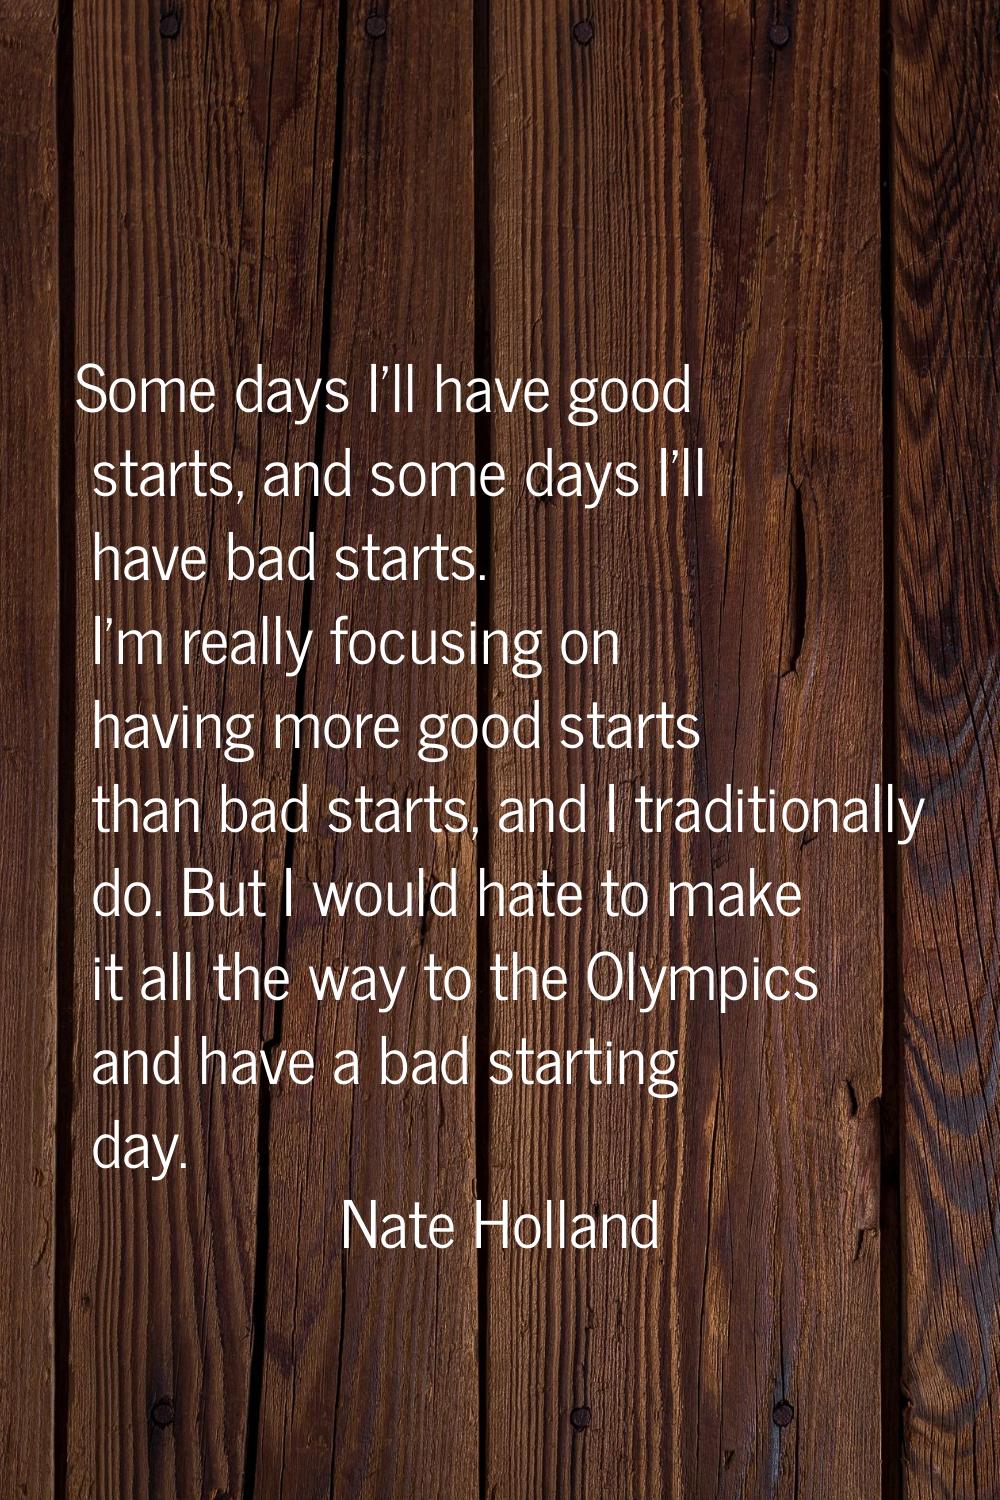 Some days I'll have good starts, and some days I'll have bad starts. I'm really focusing on having 